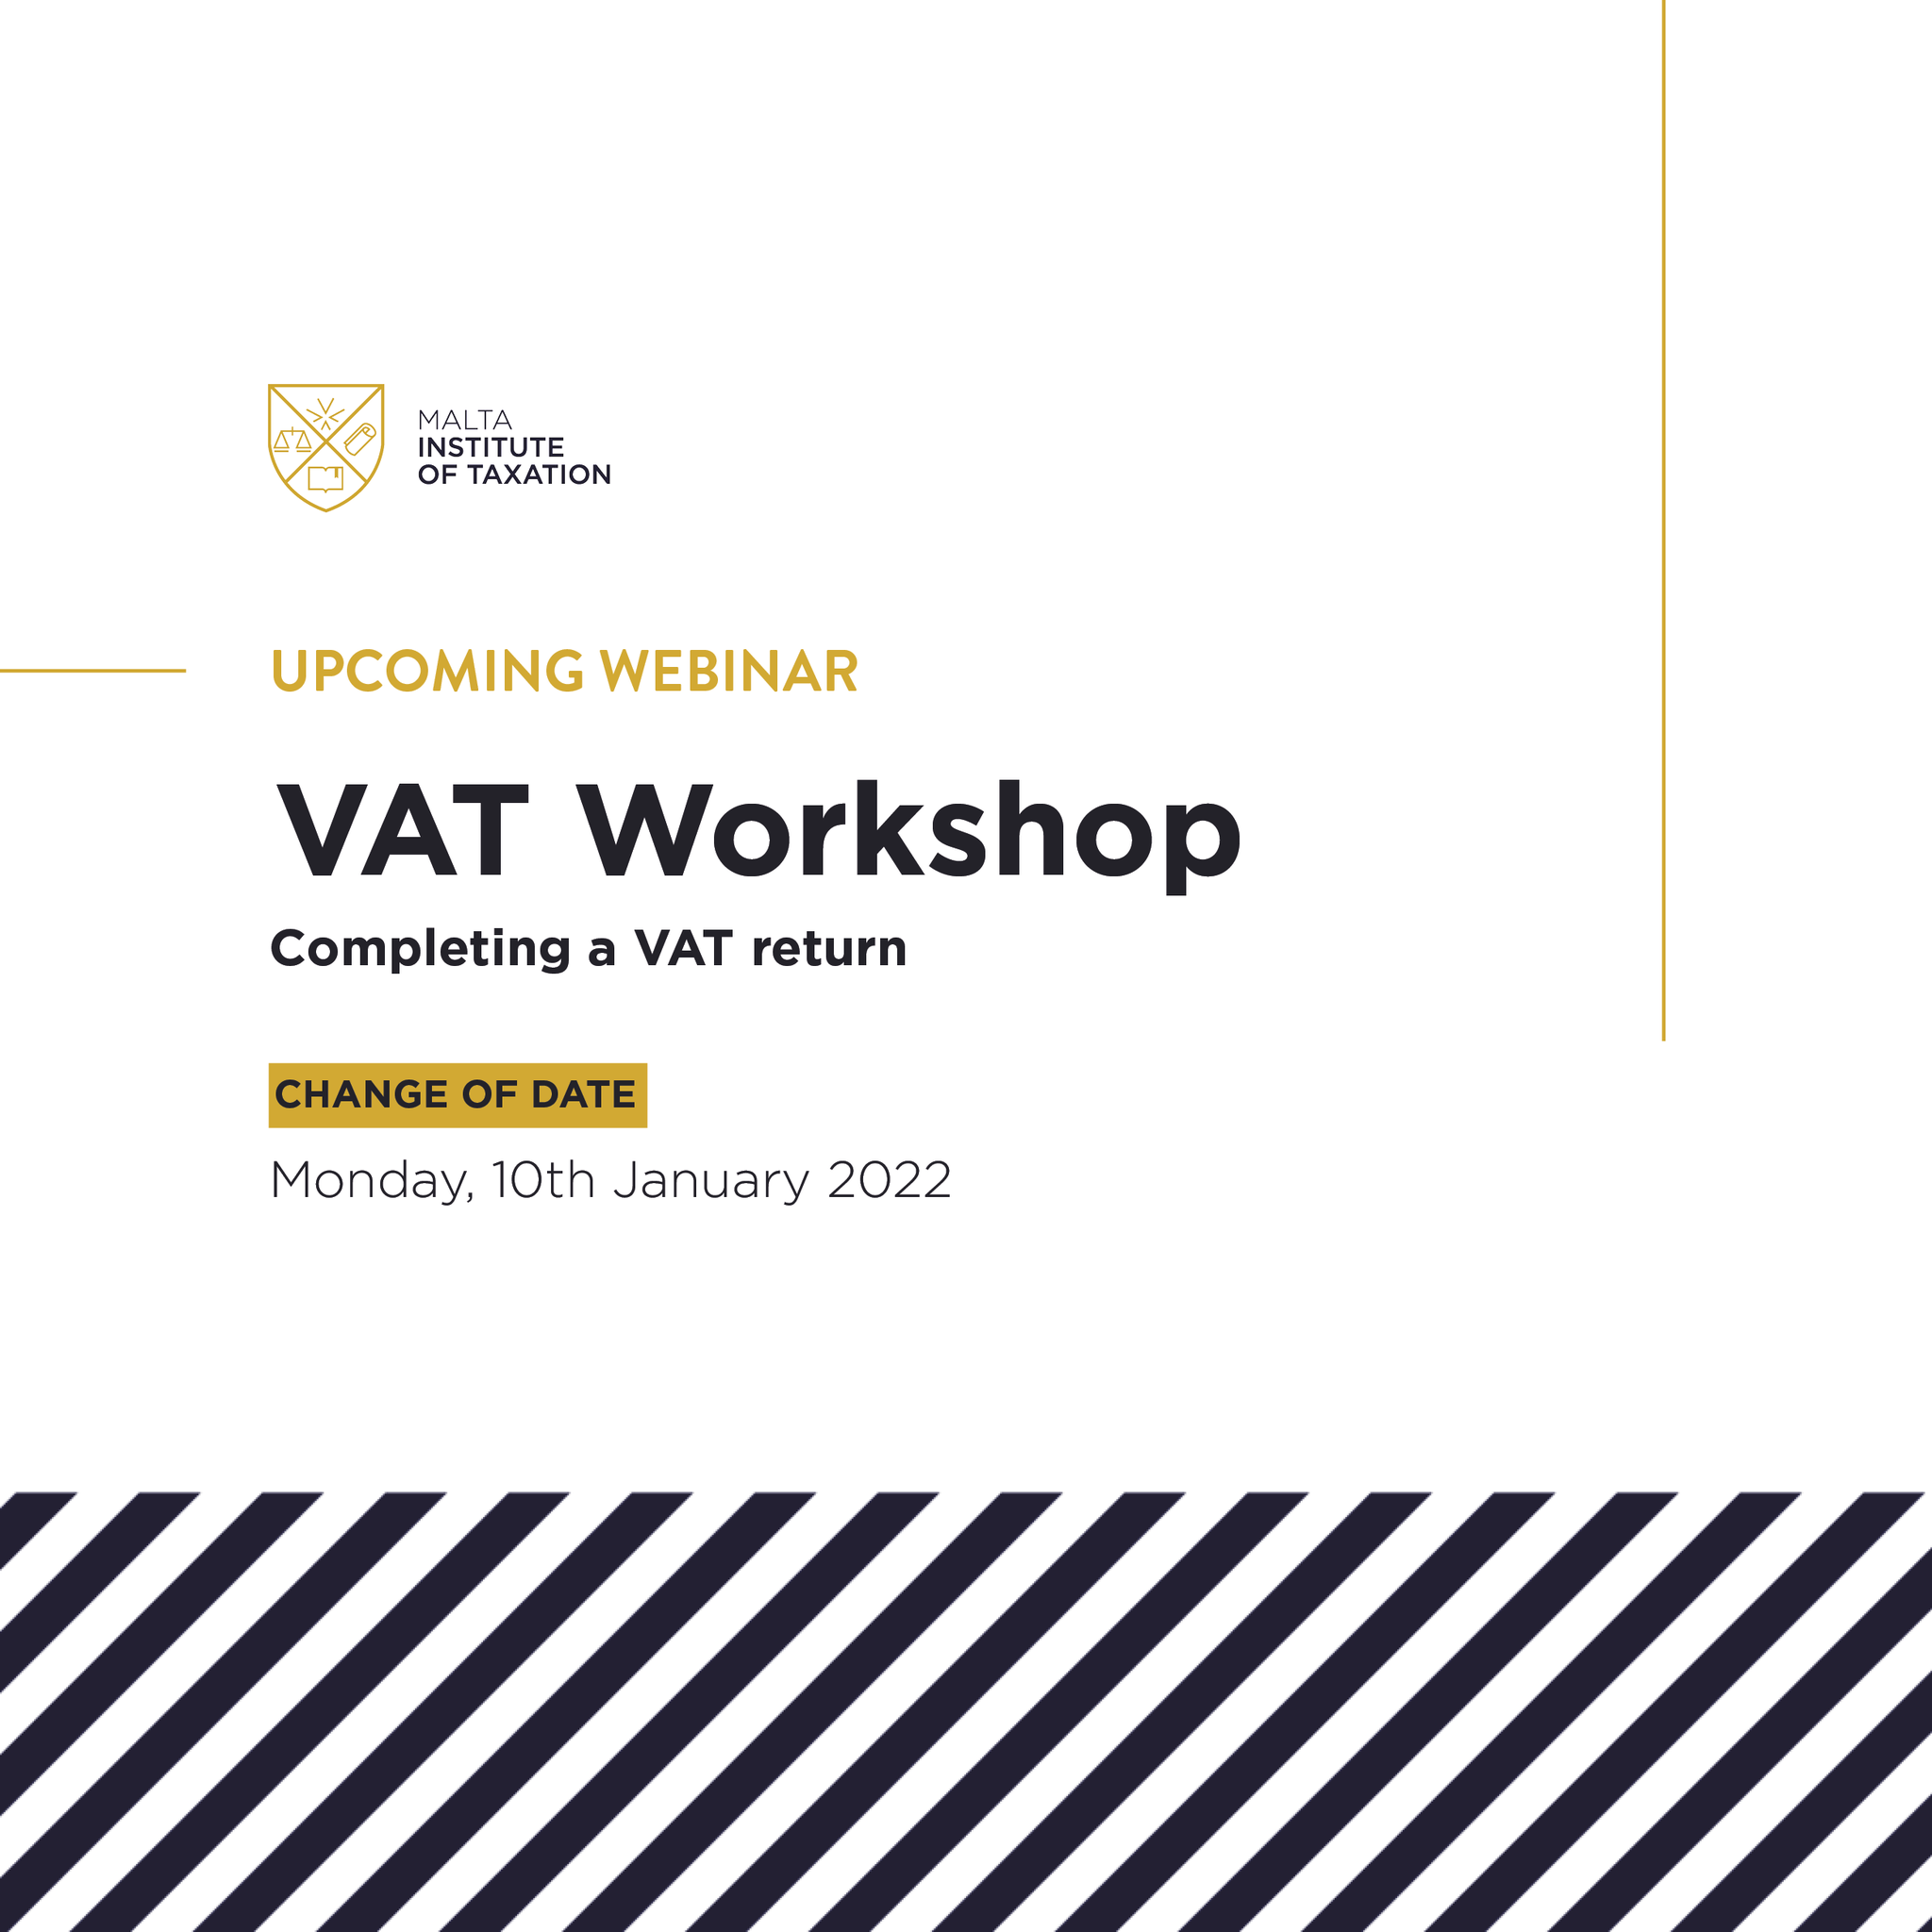 VAT Workshop organised by Malta Institute of Taxation